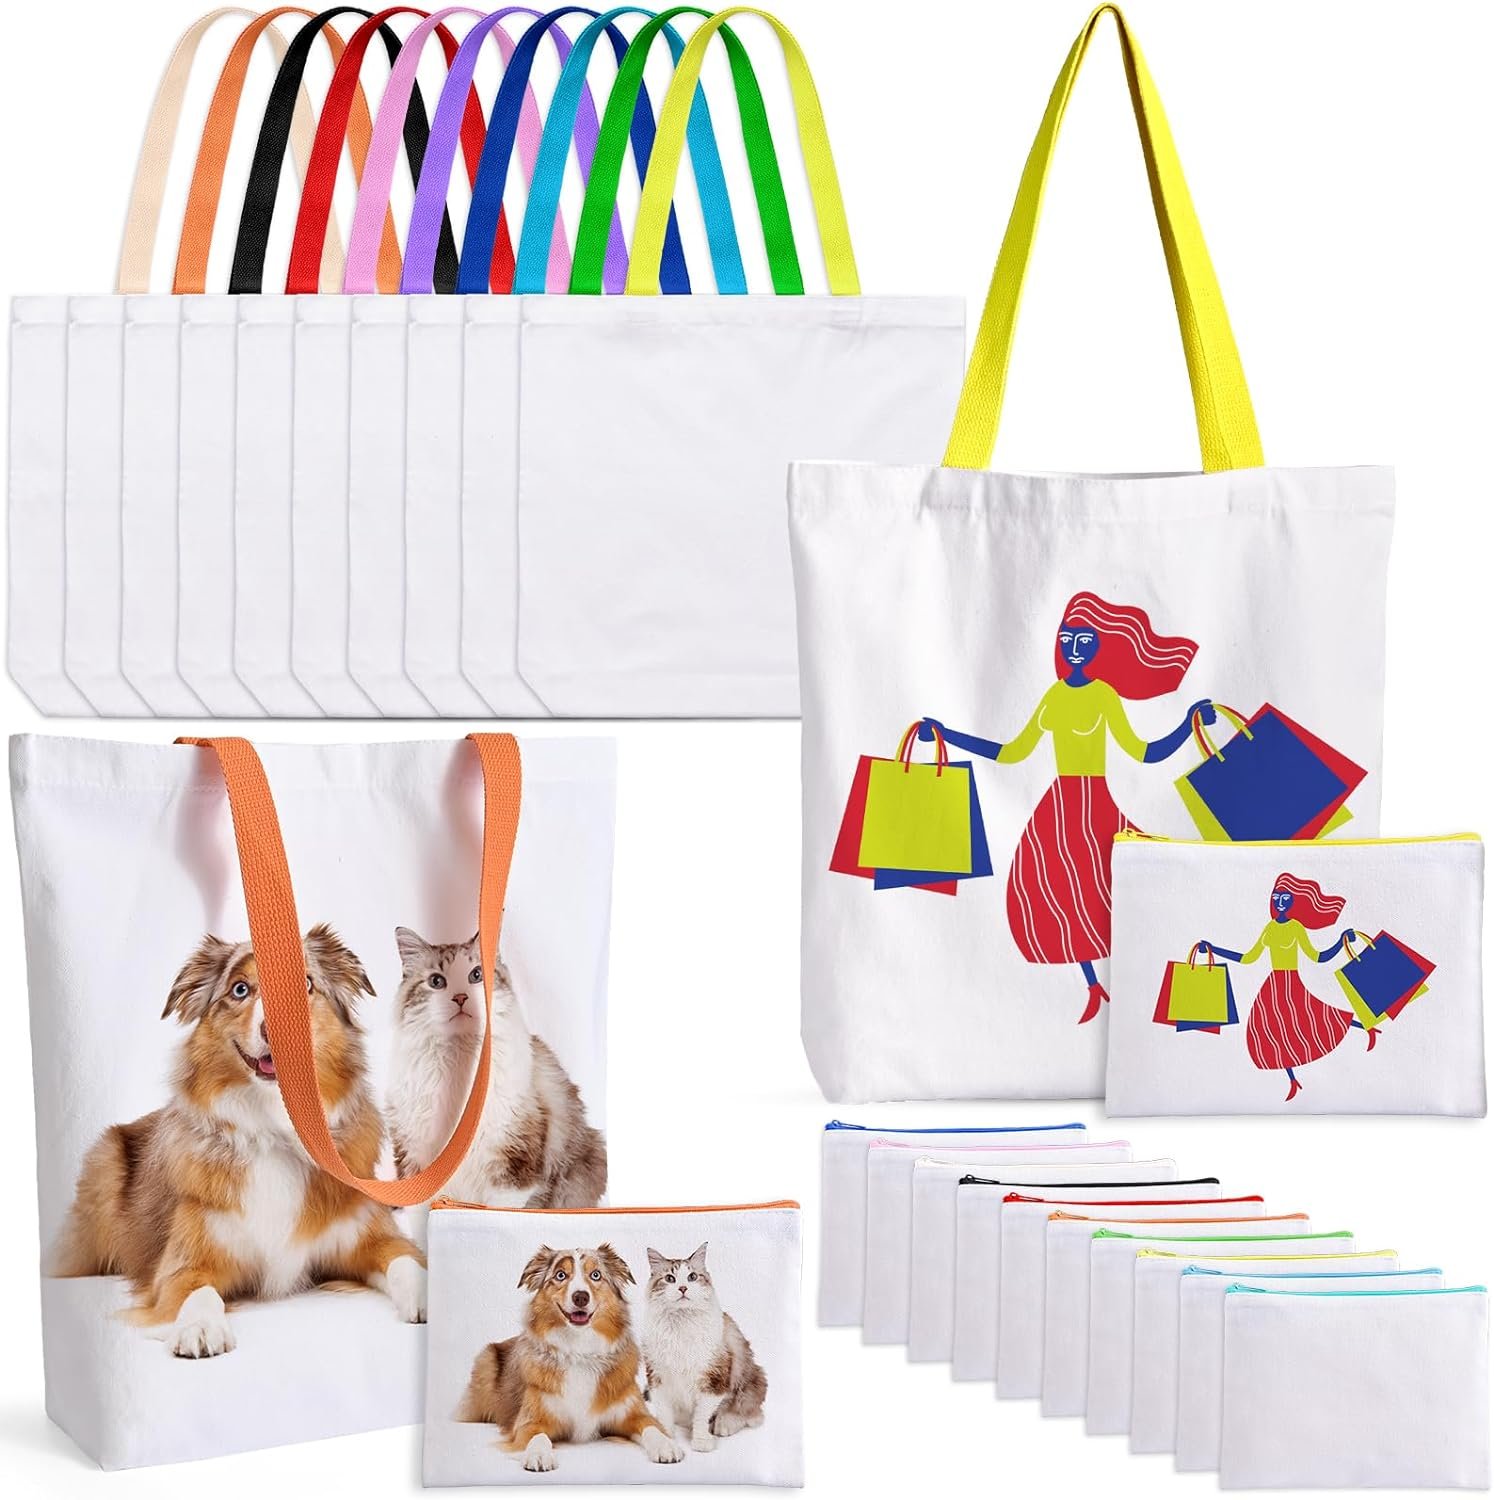 20 Pack Sublimation Blanks Tote bags, MAFYE Reusable Grocery Bags DIY Heat Transfer Canvas Tote Bags Cosmetic Makeup Bags Shopping Bags with Customized Color for DIY, Advertising, Christmas Craft Gift